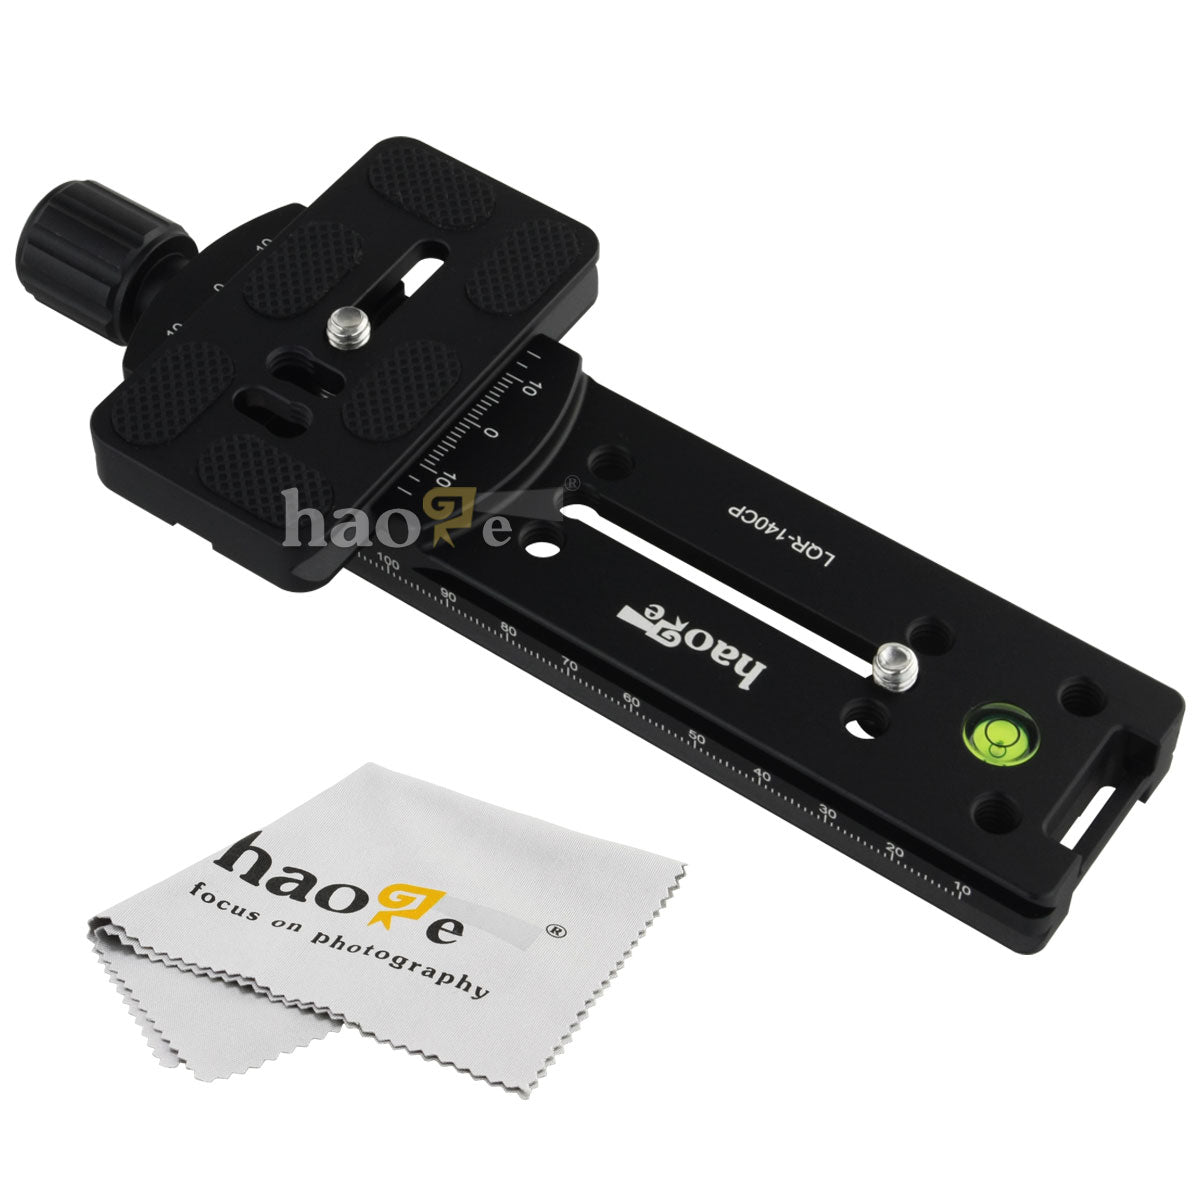 Haoge 140mm Nodal Slide Double Dovetail Focusing Rail Plate with Metal Quick Release Clamp and 70mm Plate for Camera Panoramic Panorama Close Up Macro Shoot fit Arca Swiss RRS Benro Kirk